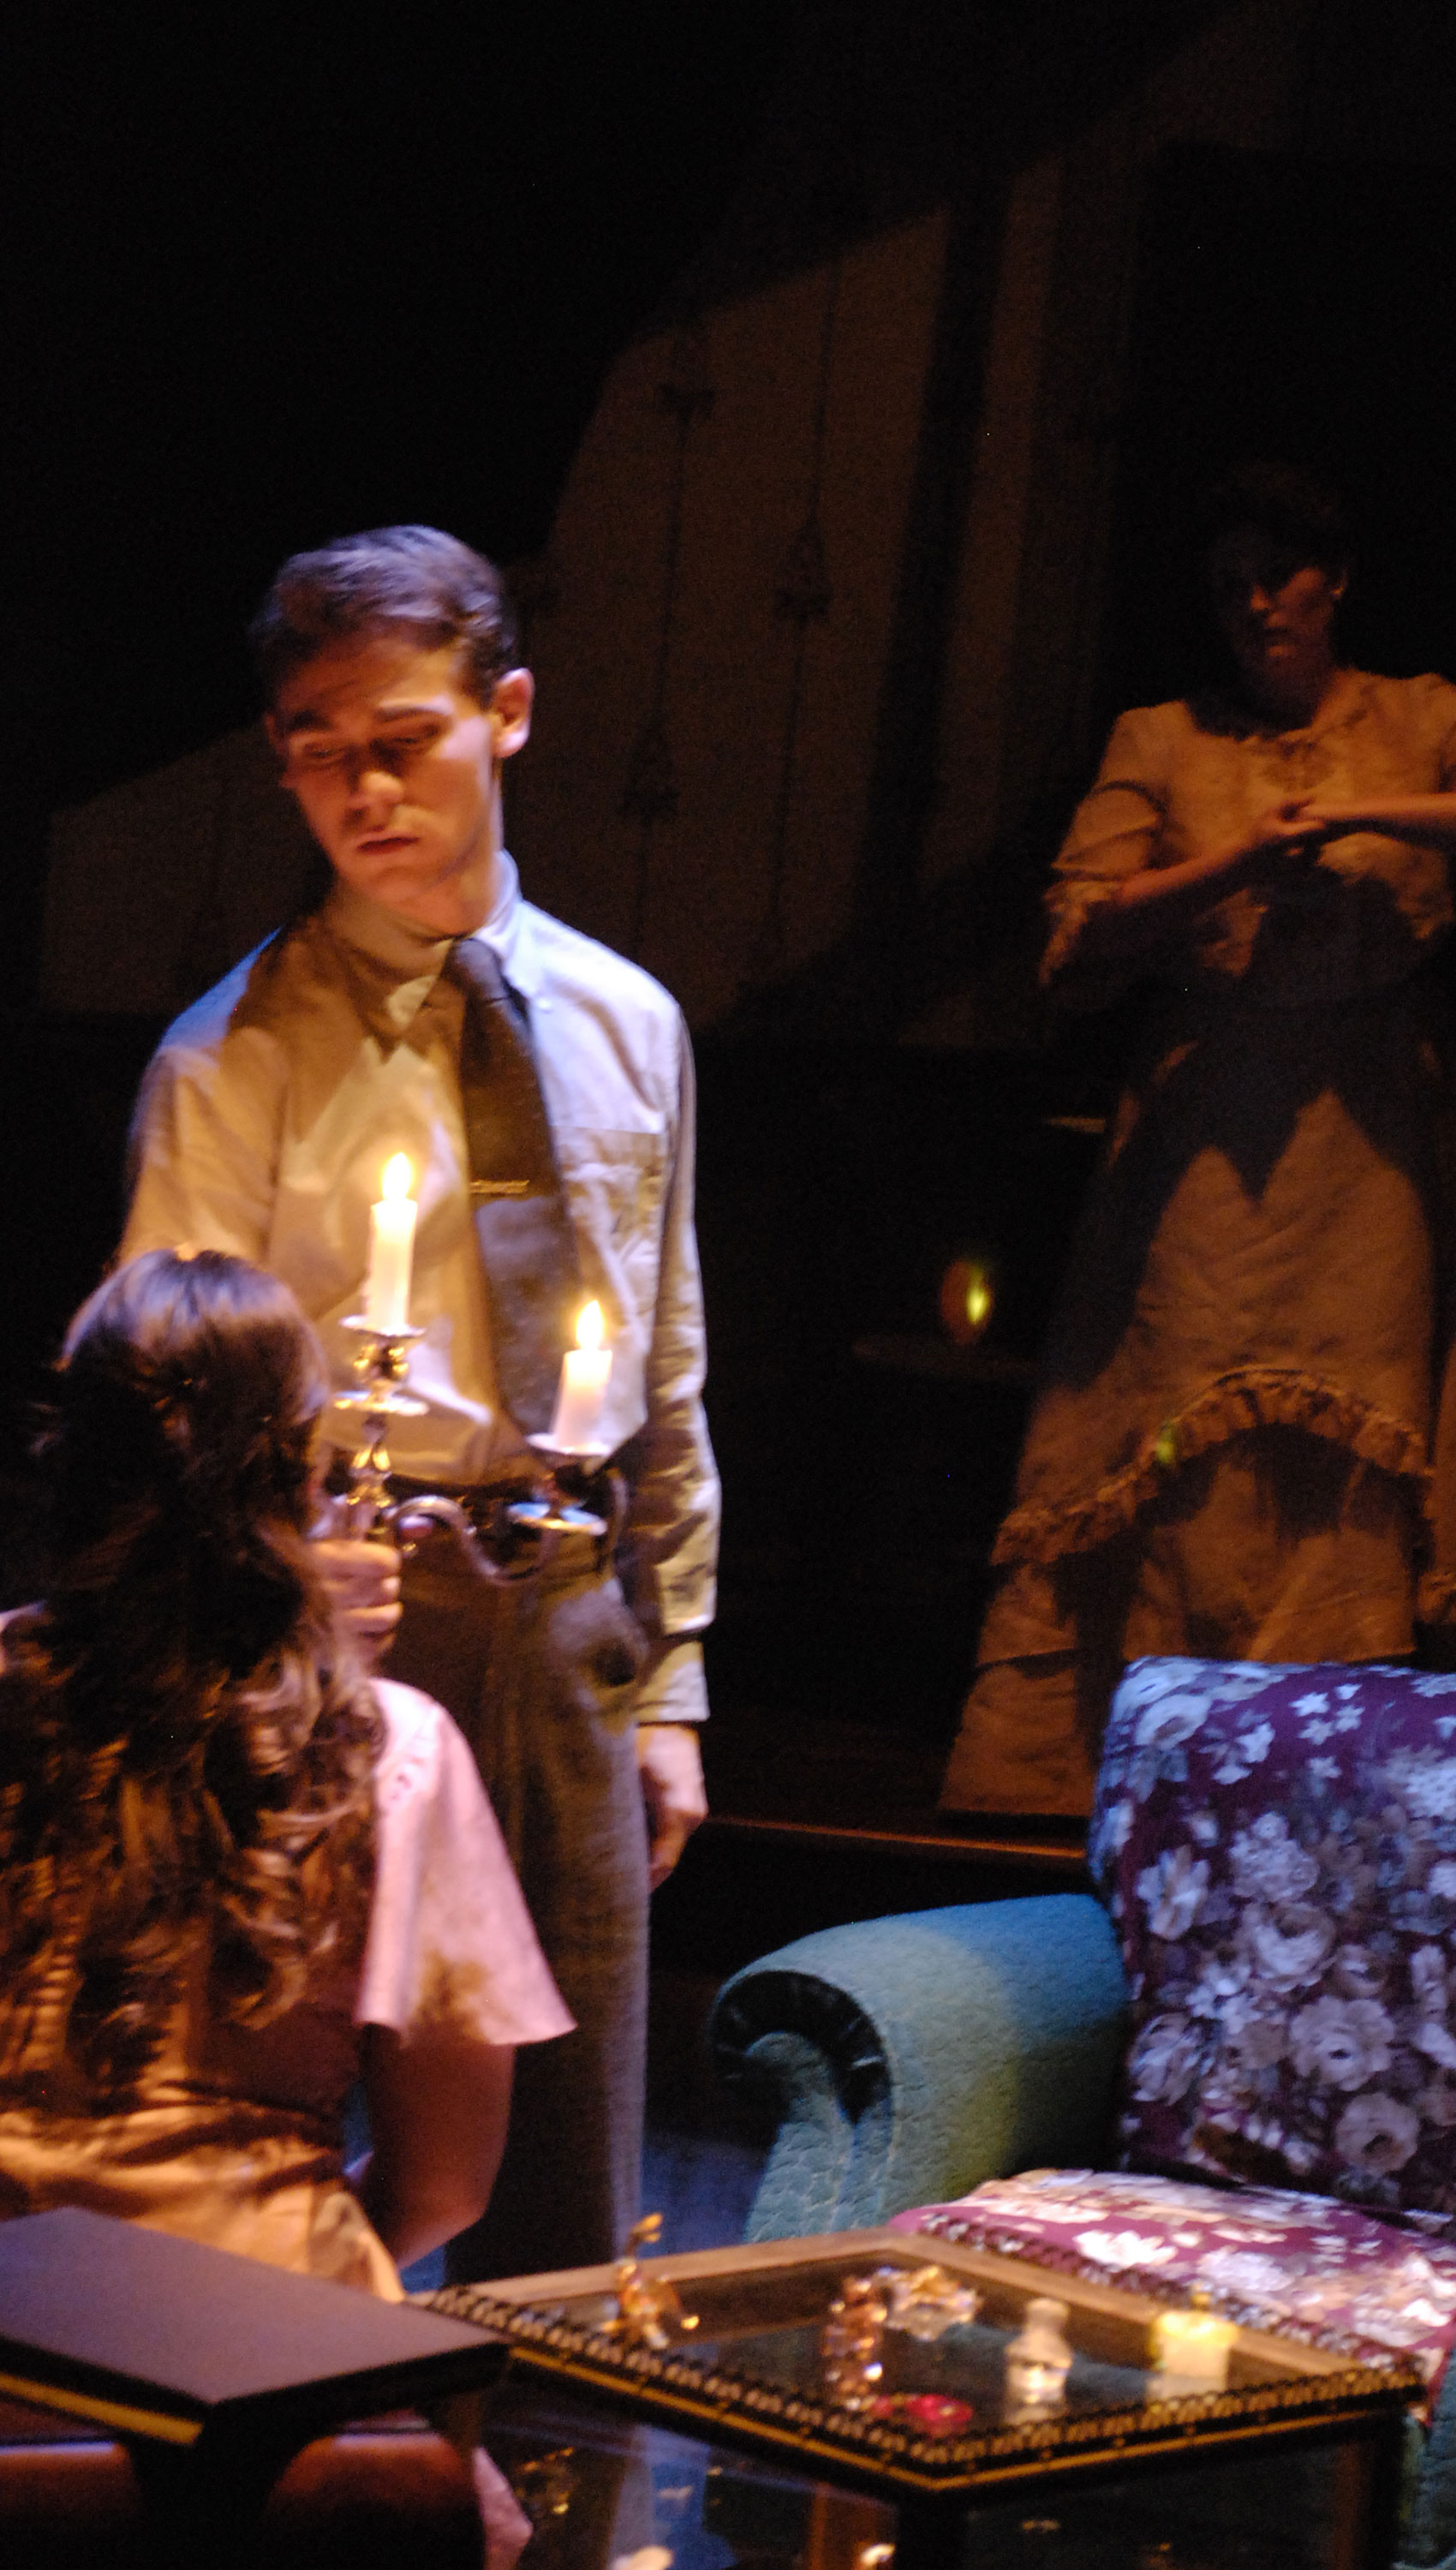 A young man stands in front of a young woman, who sits looking up at him, with a lit candlestick that illuminates them both, while an older woman watches the two from the shadows.